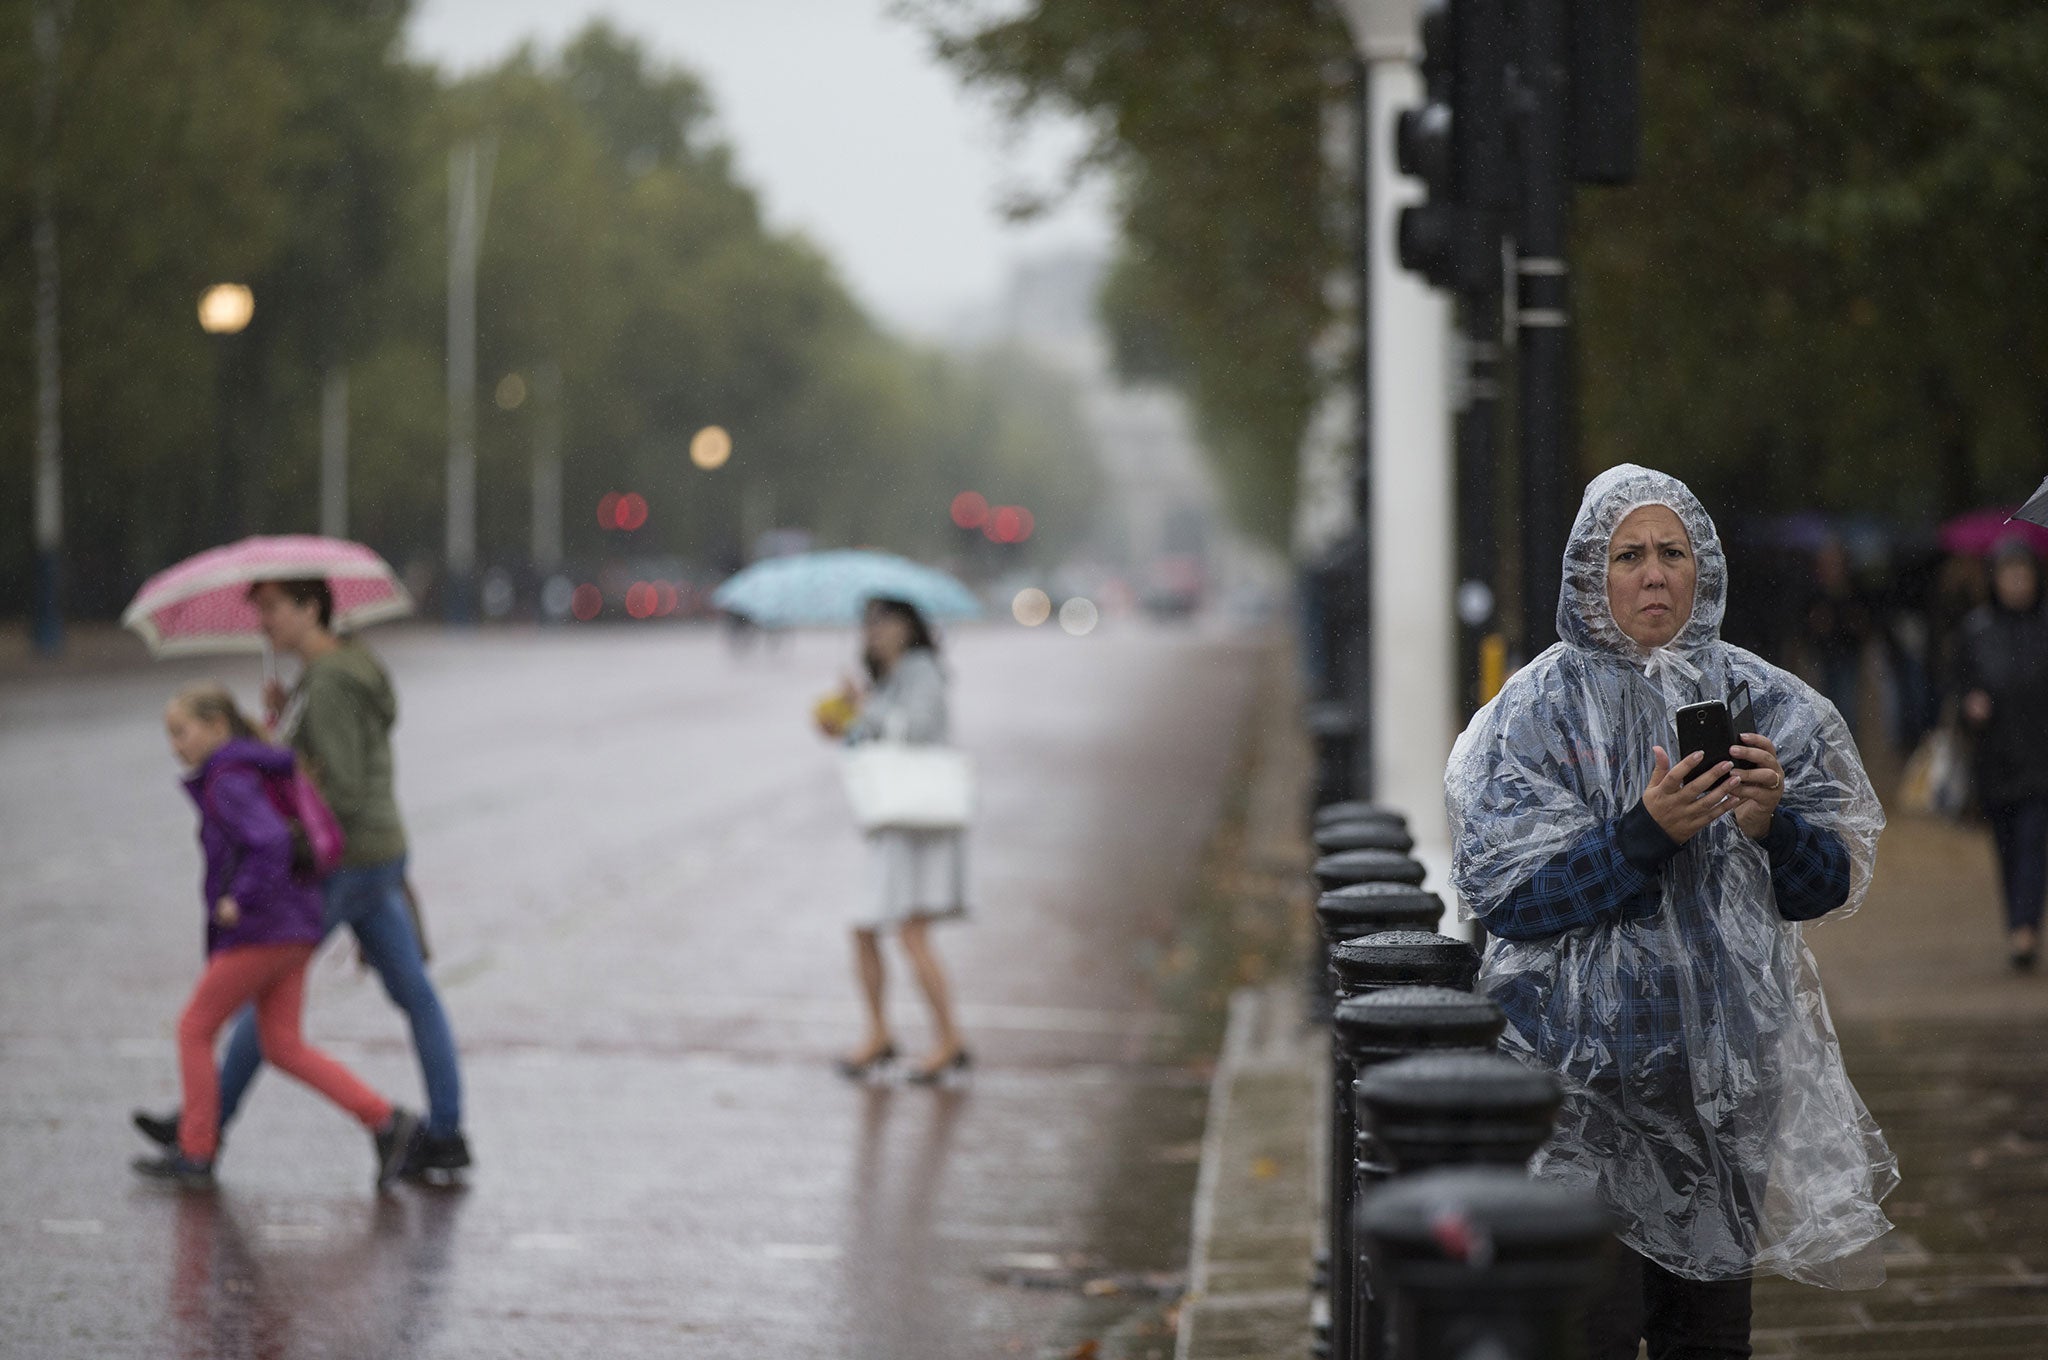 Sightseers admire the area surrounding Buckingham Palace during poor weather in London, England